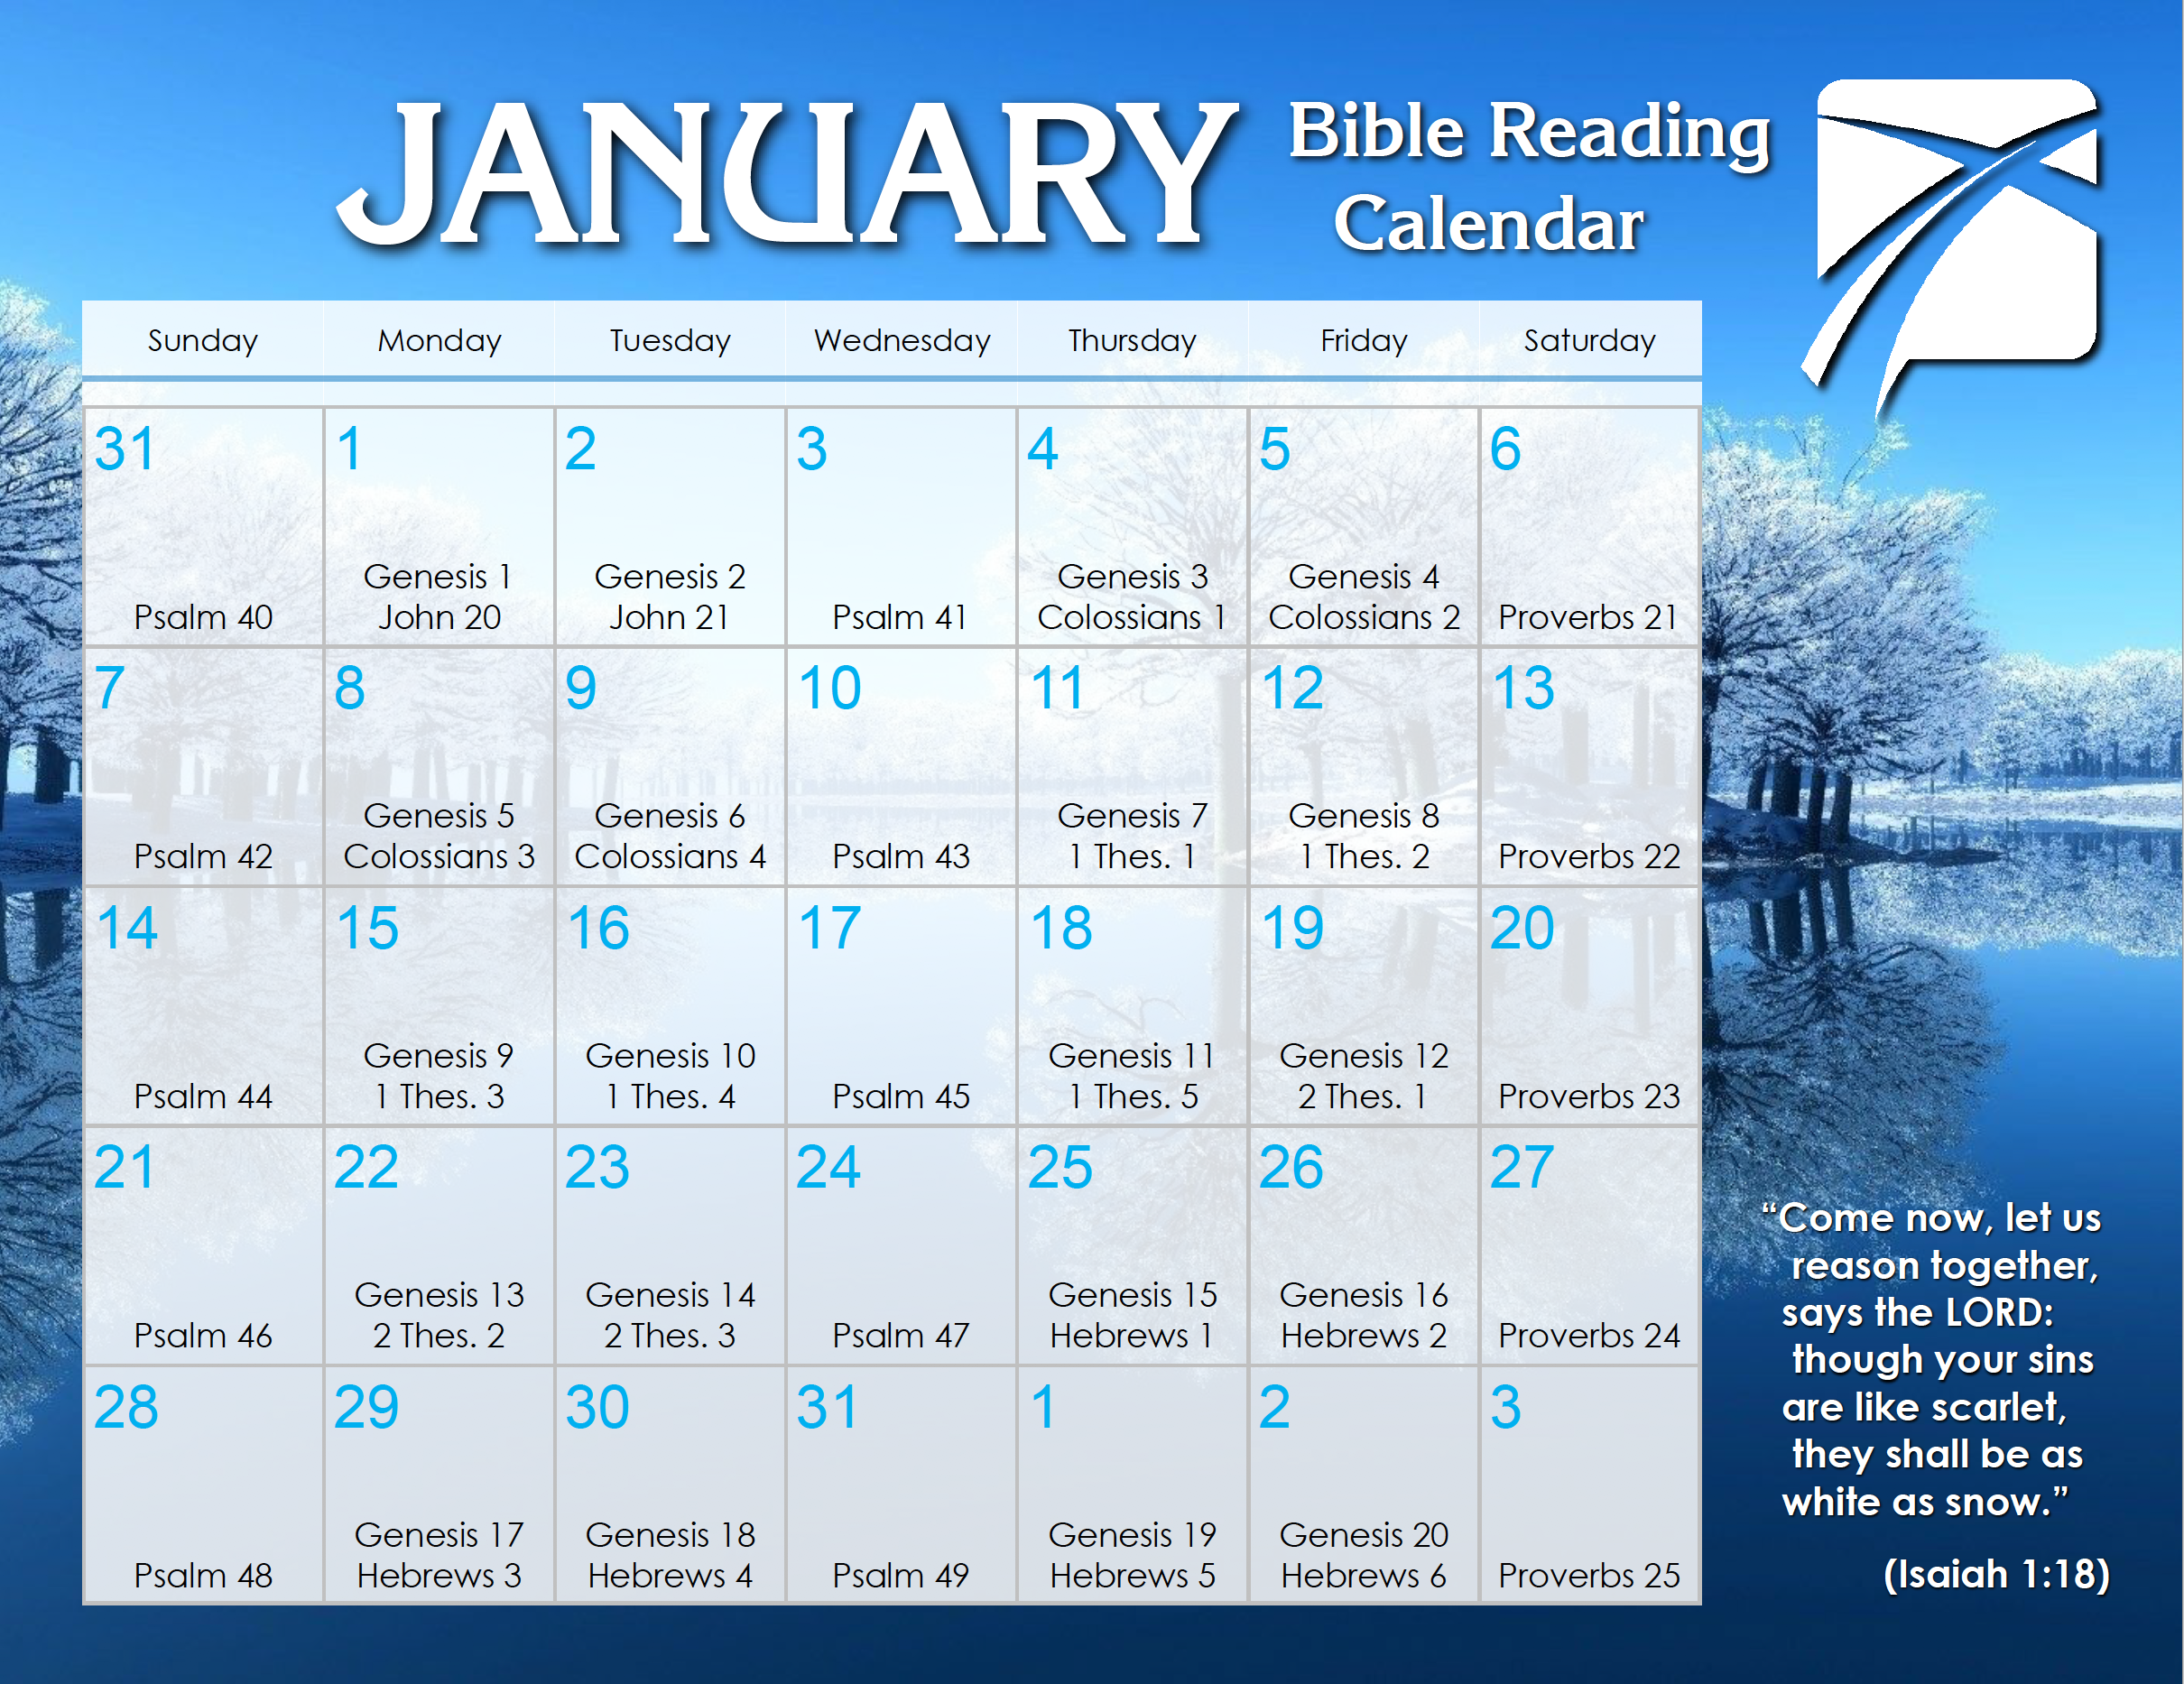 January 2018 Daily Bible Reading Calendar In God's Image